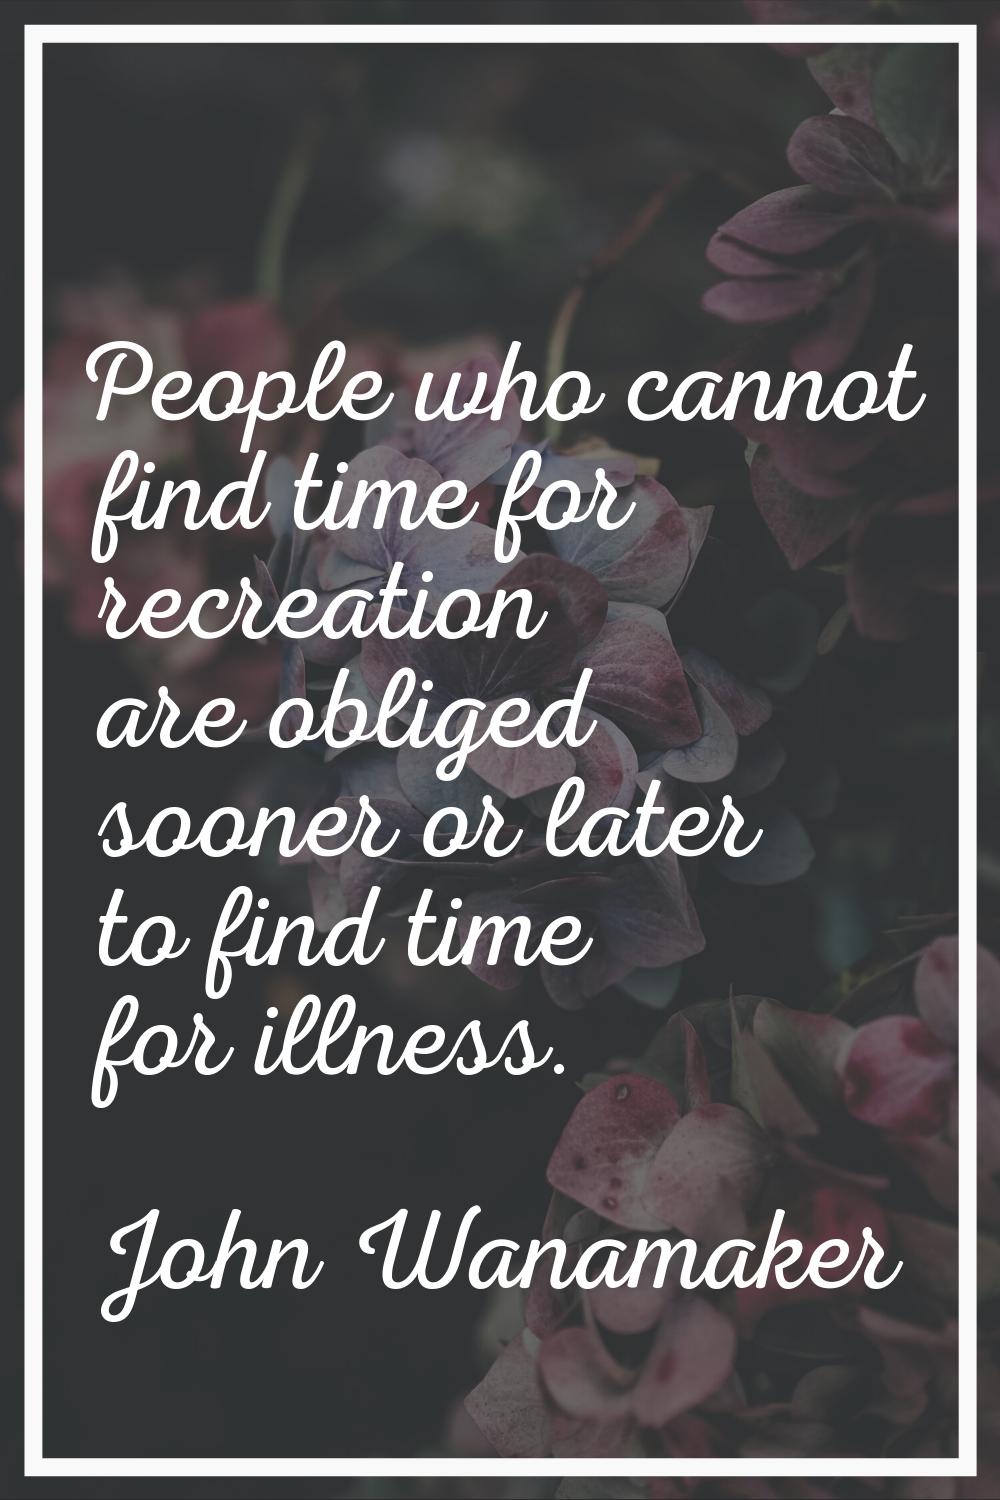 People who cannot find time for recreation are obliged sooner or later to find time for illness.